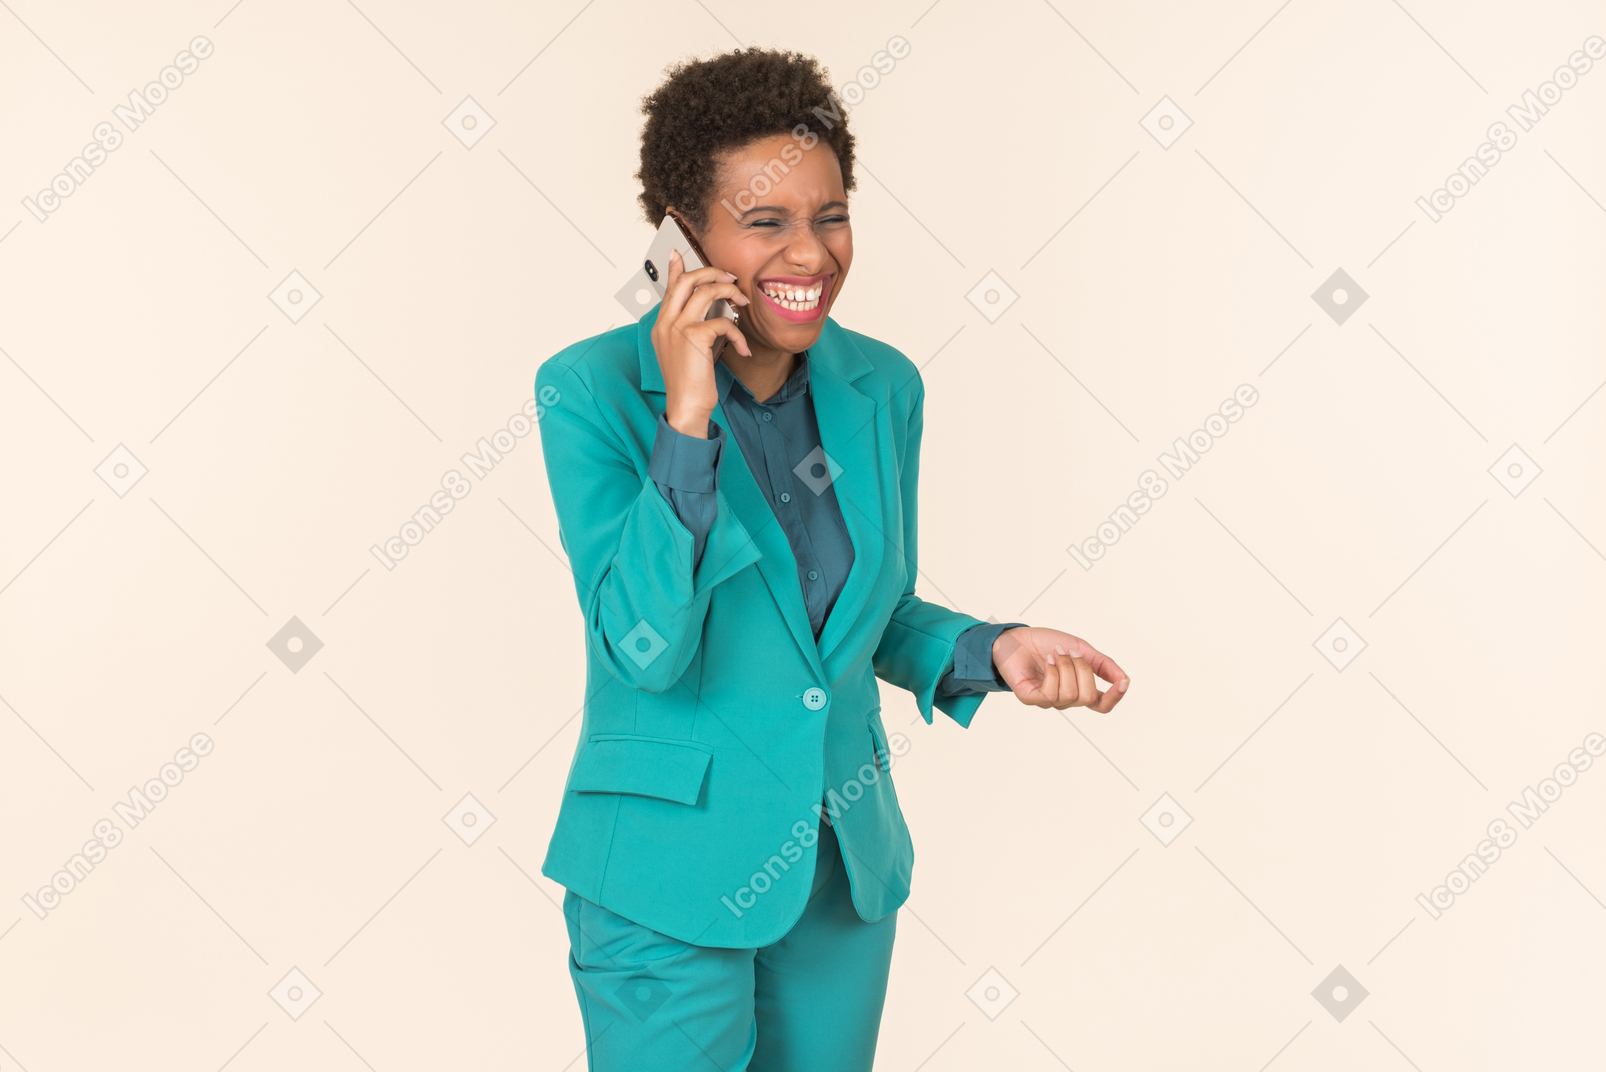 Young black woman with a short haircut, posing in a blue outfit with a mobile phone in her hand